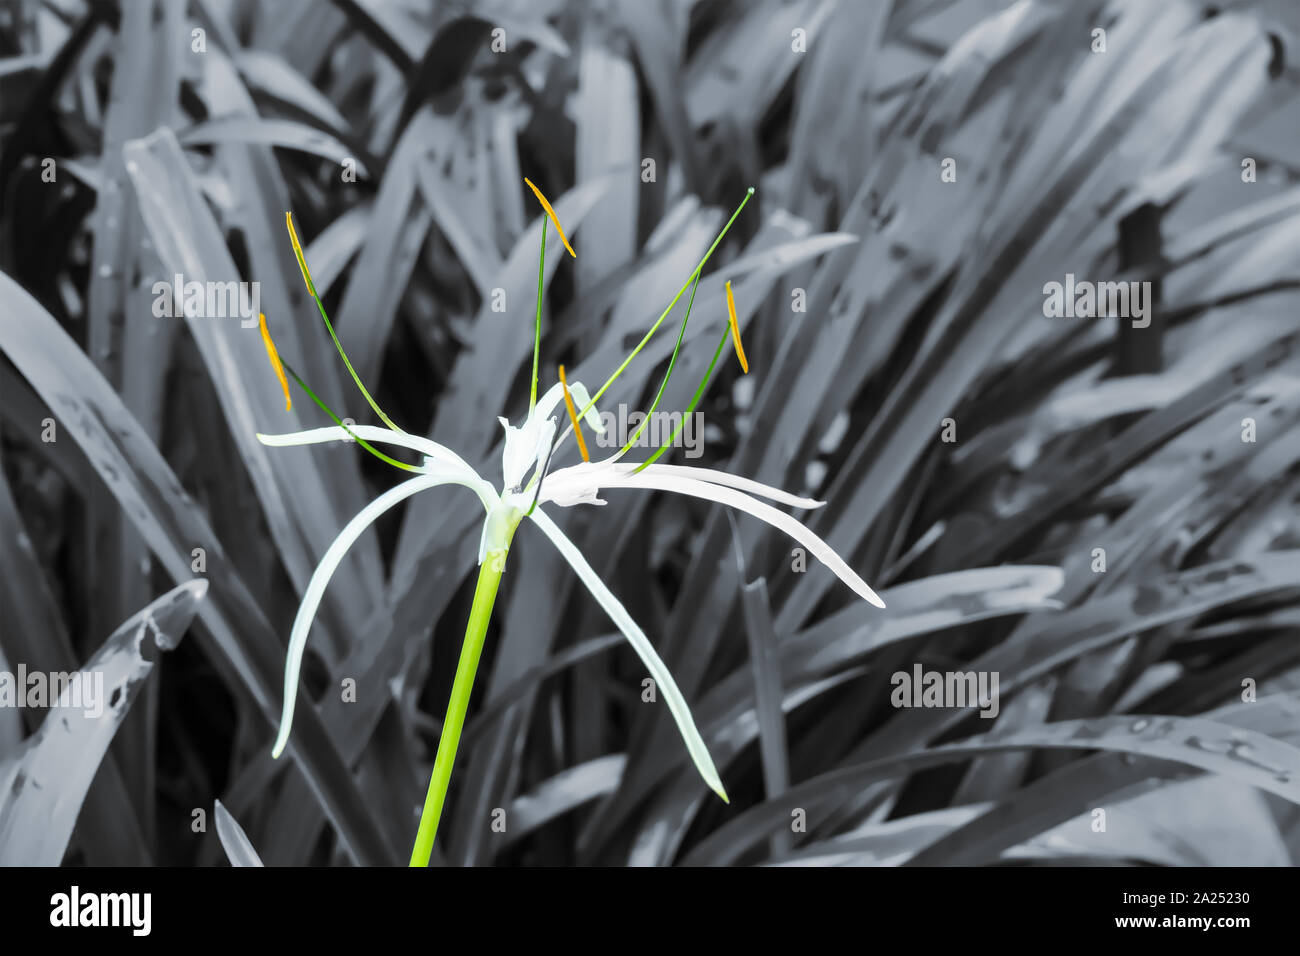 Crinum asiaticum or giant crinum lily on a nature black and white background. Stock Photo